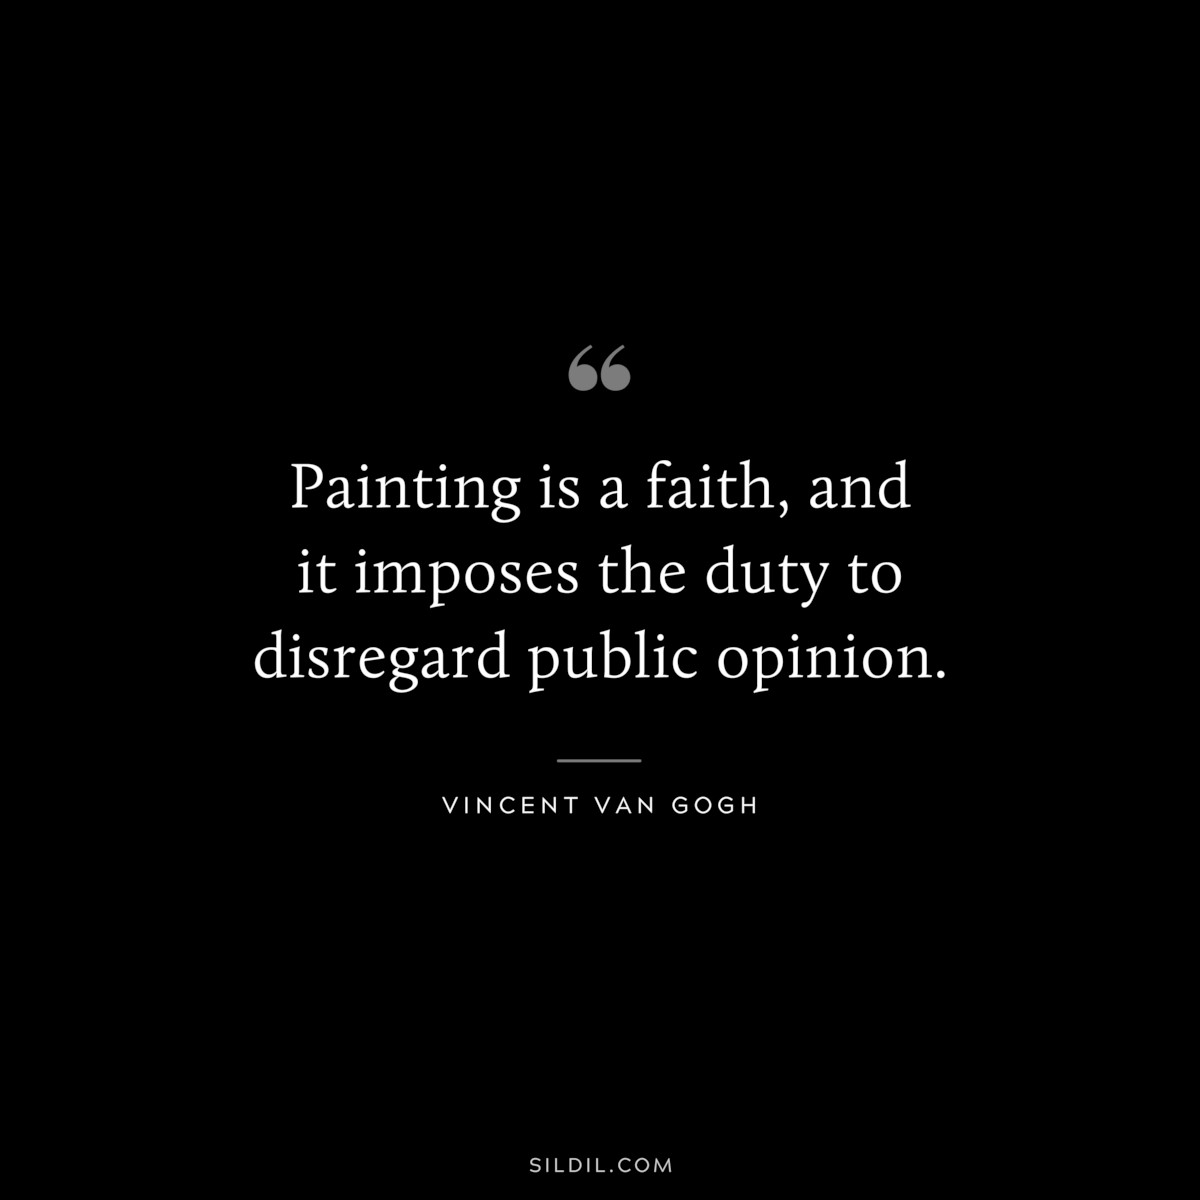 Painting is a faith, and it imposes the duty to disregard public opinion. ― Vincent van Gogh